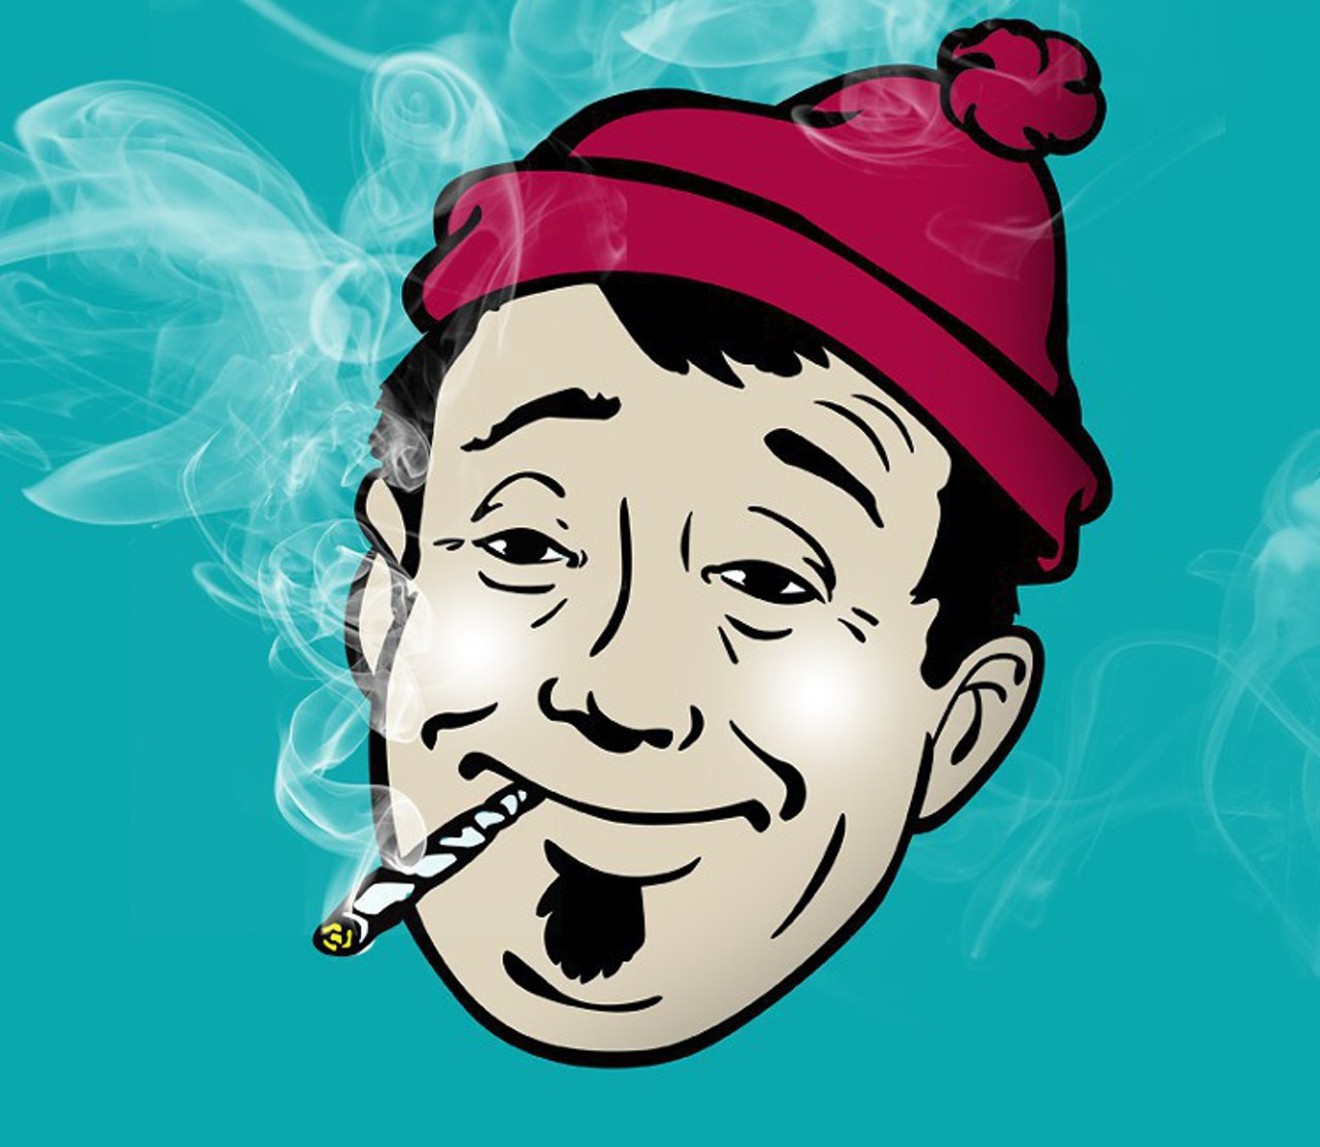 Cartoon weed smoker with red beanie